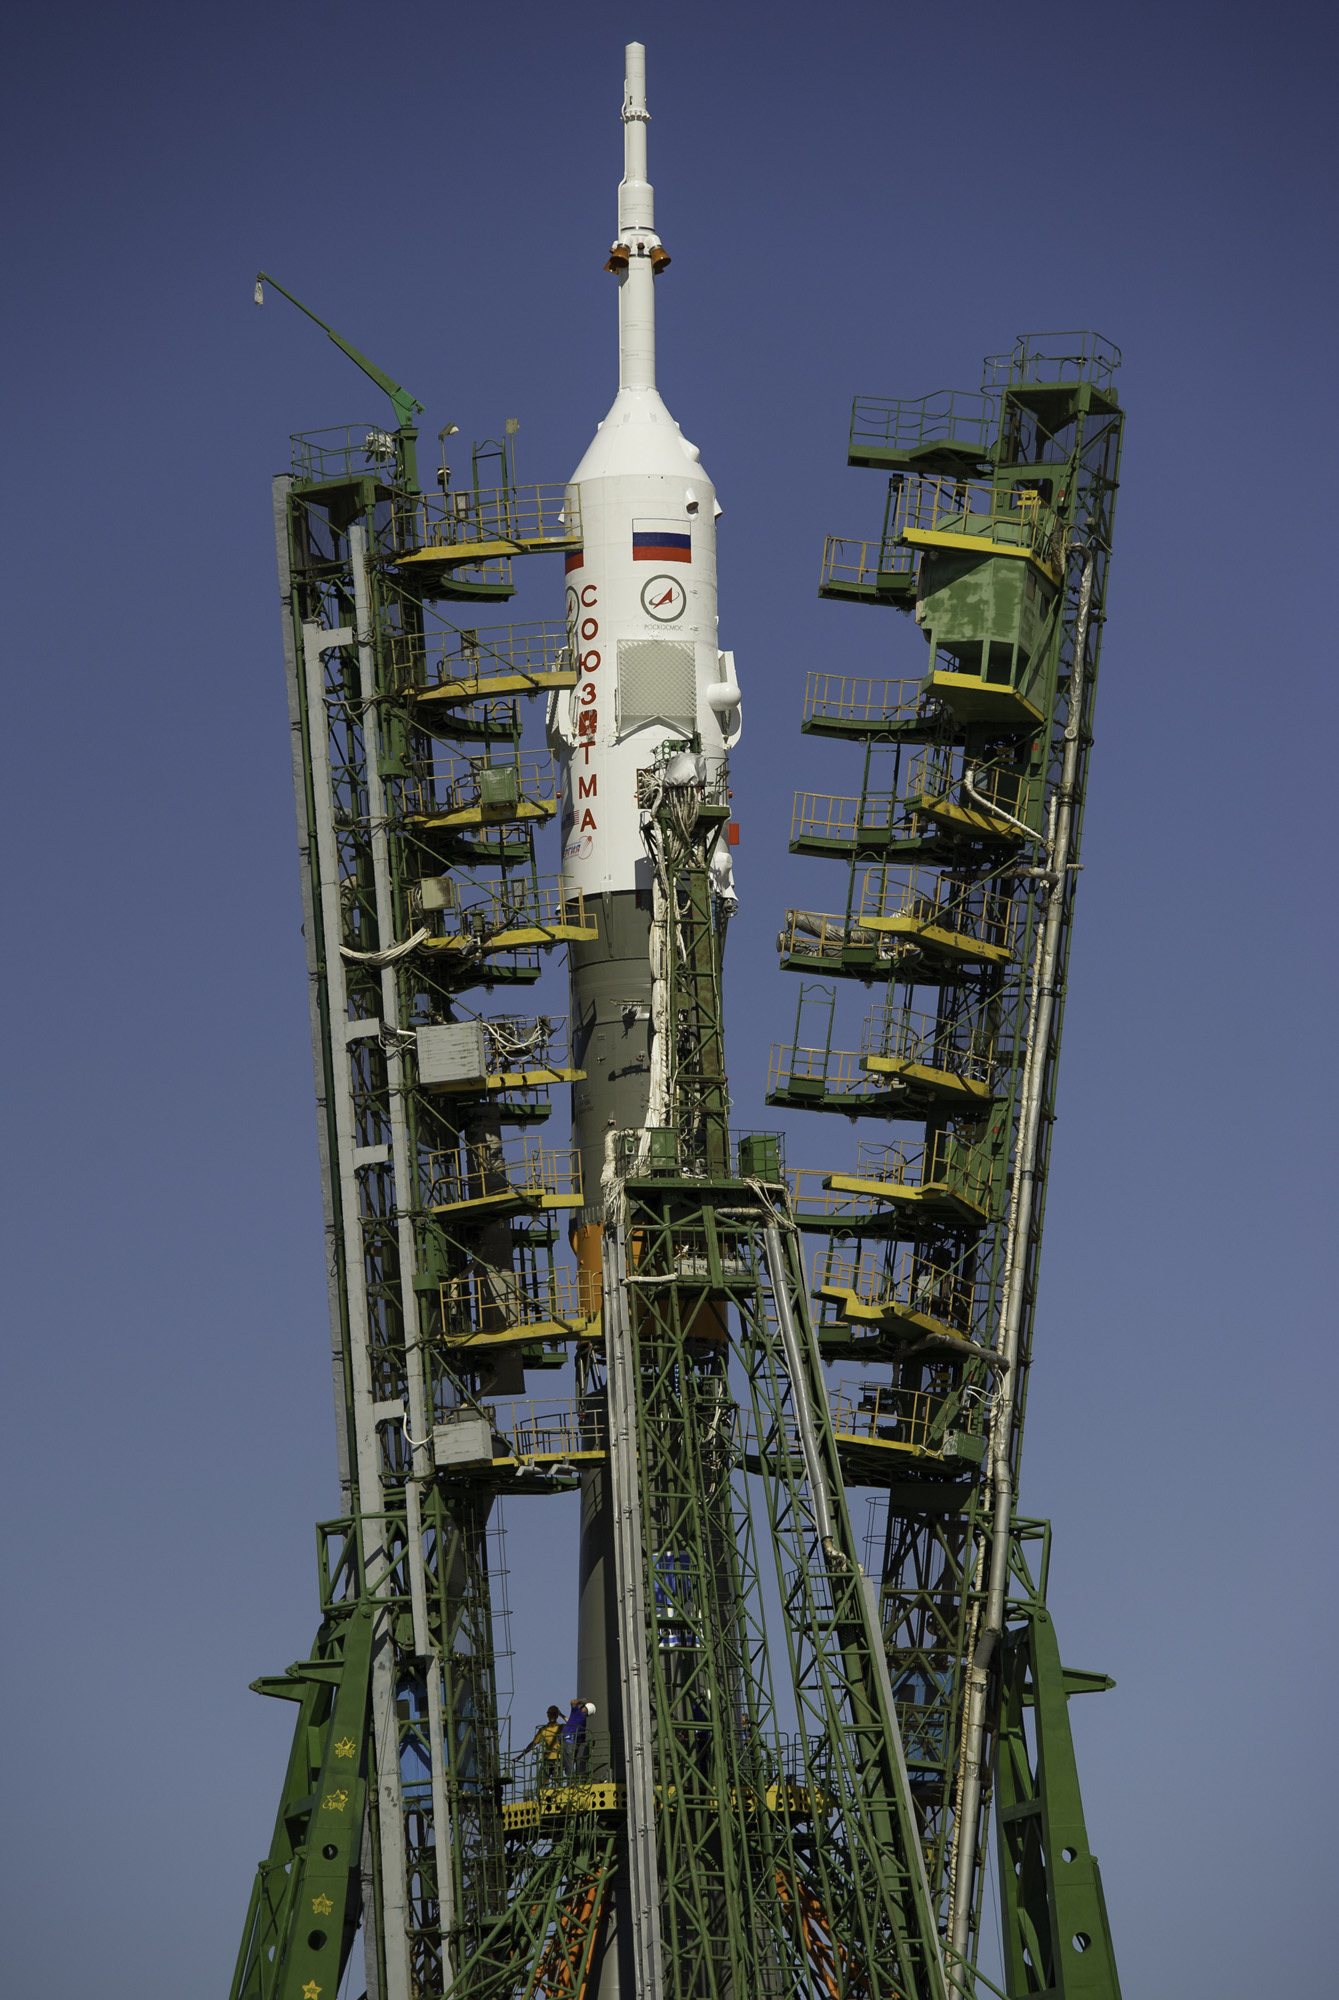  Large gantry mechanisms on either side of the Soyuz TMA-205M spacecraft are raised into position to secure the rocket at the launch pad on Thursday, July 12, 2012 at the Baikonur Cosmodrome in Kazakhstan. (NASA/Carla Cioffi) 